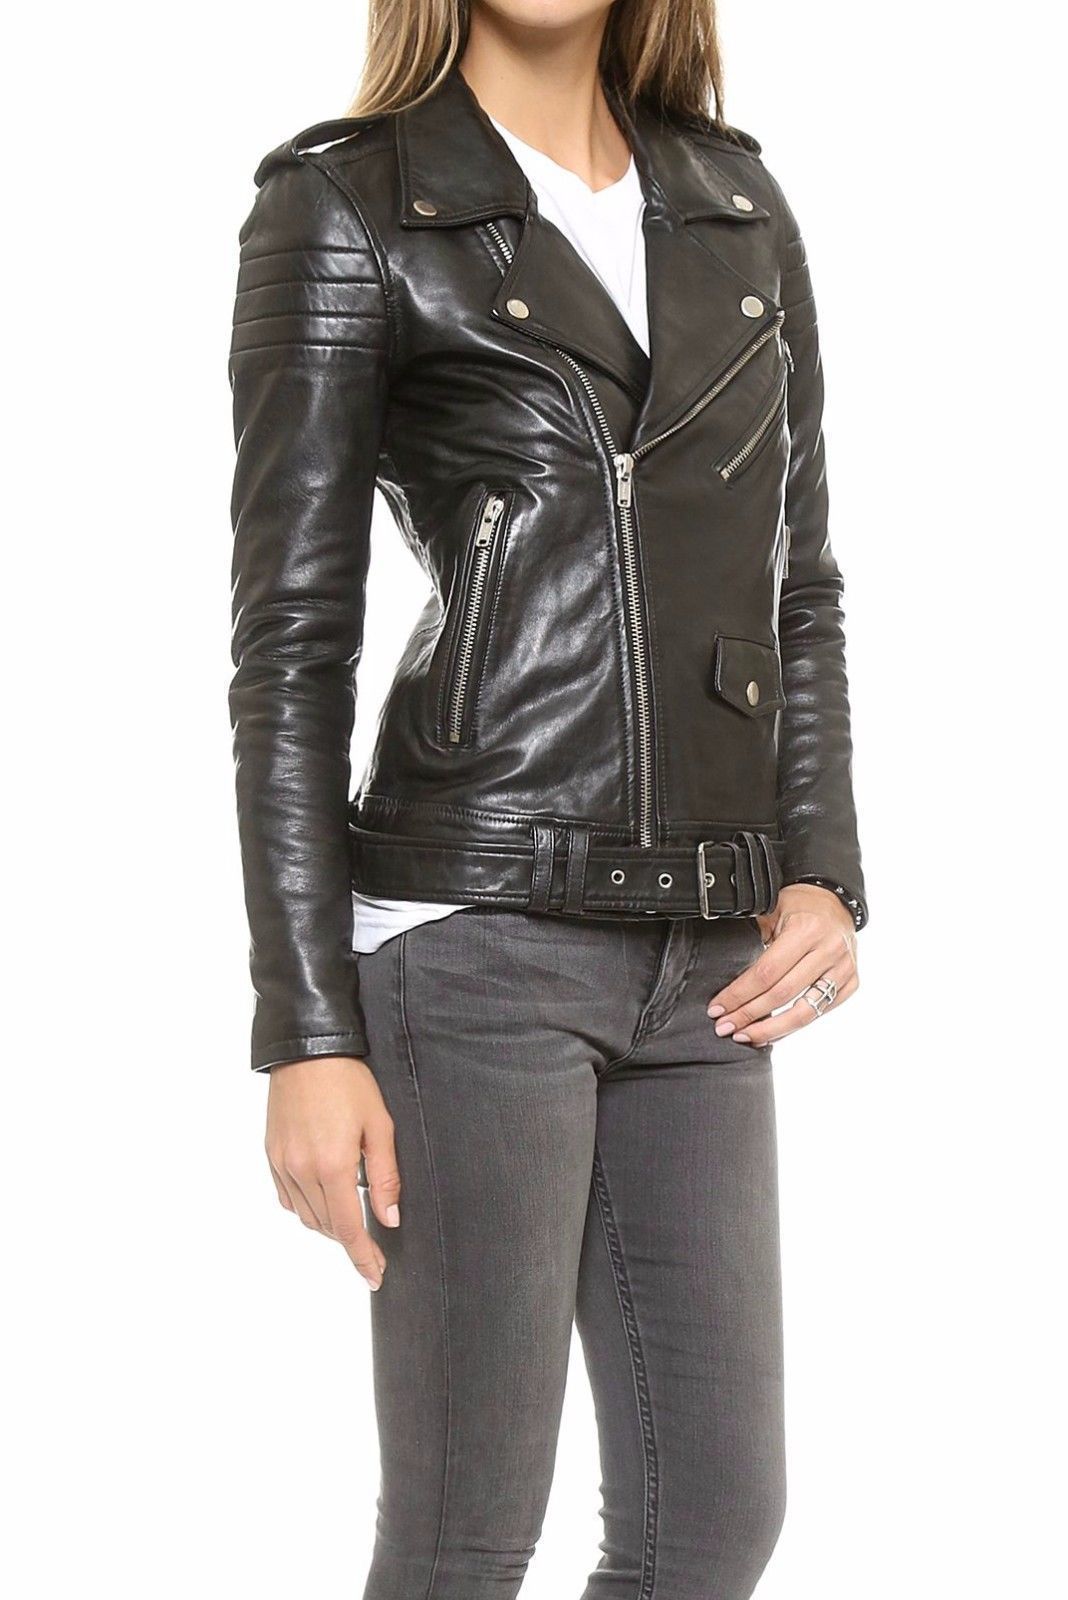 Black Women's Slim Fit Biker Style Real Leather Jacket High Quality